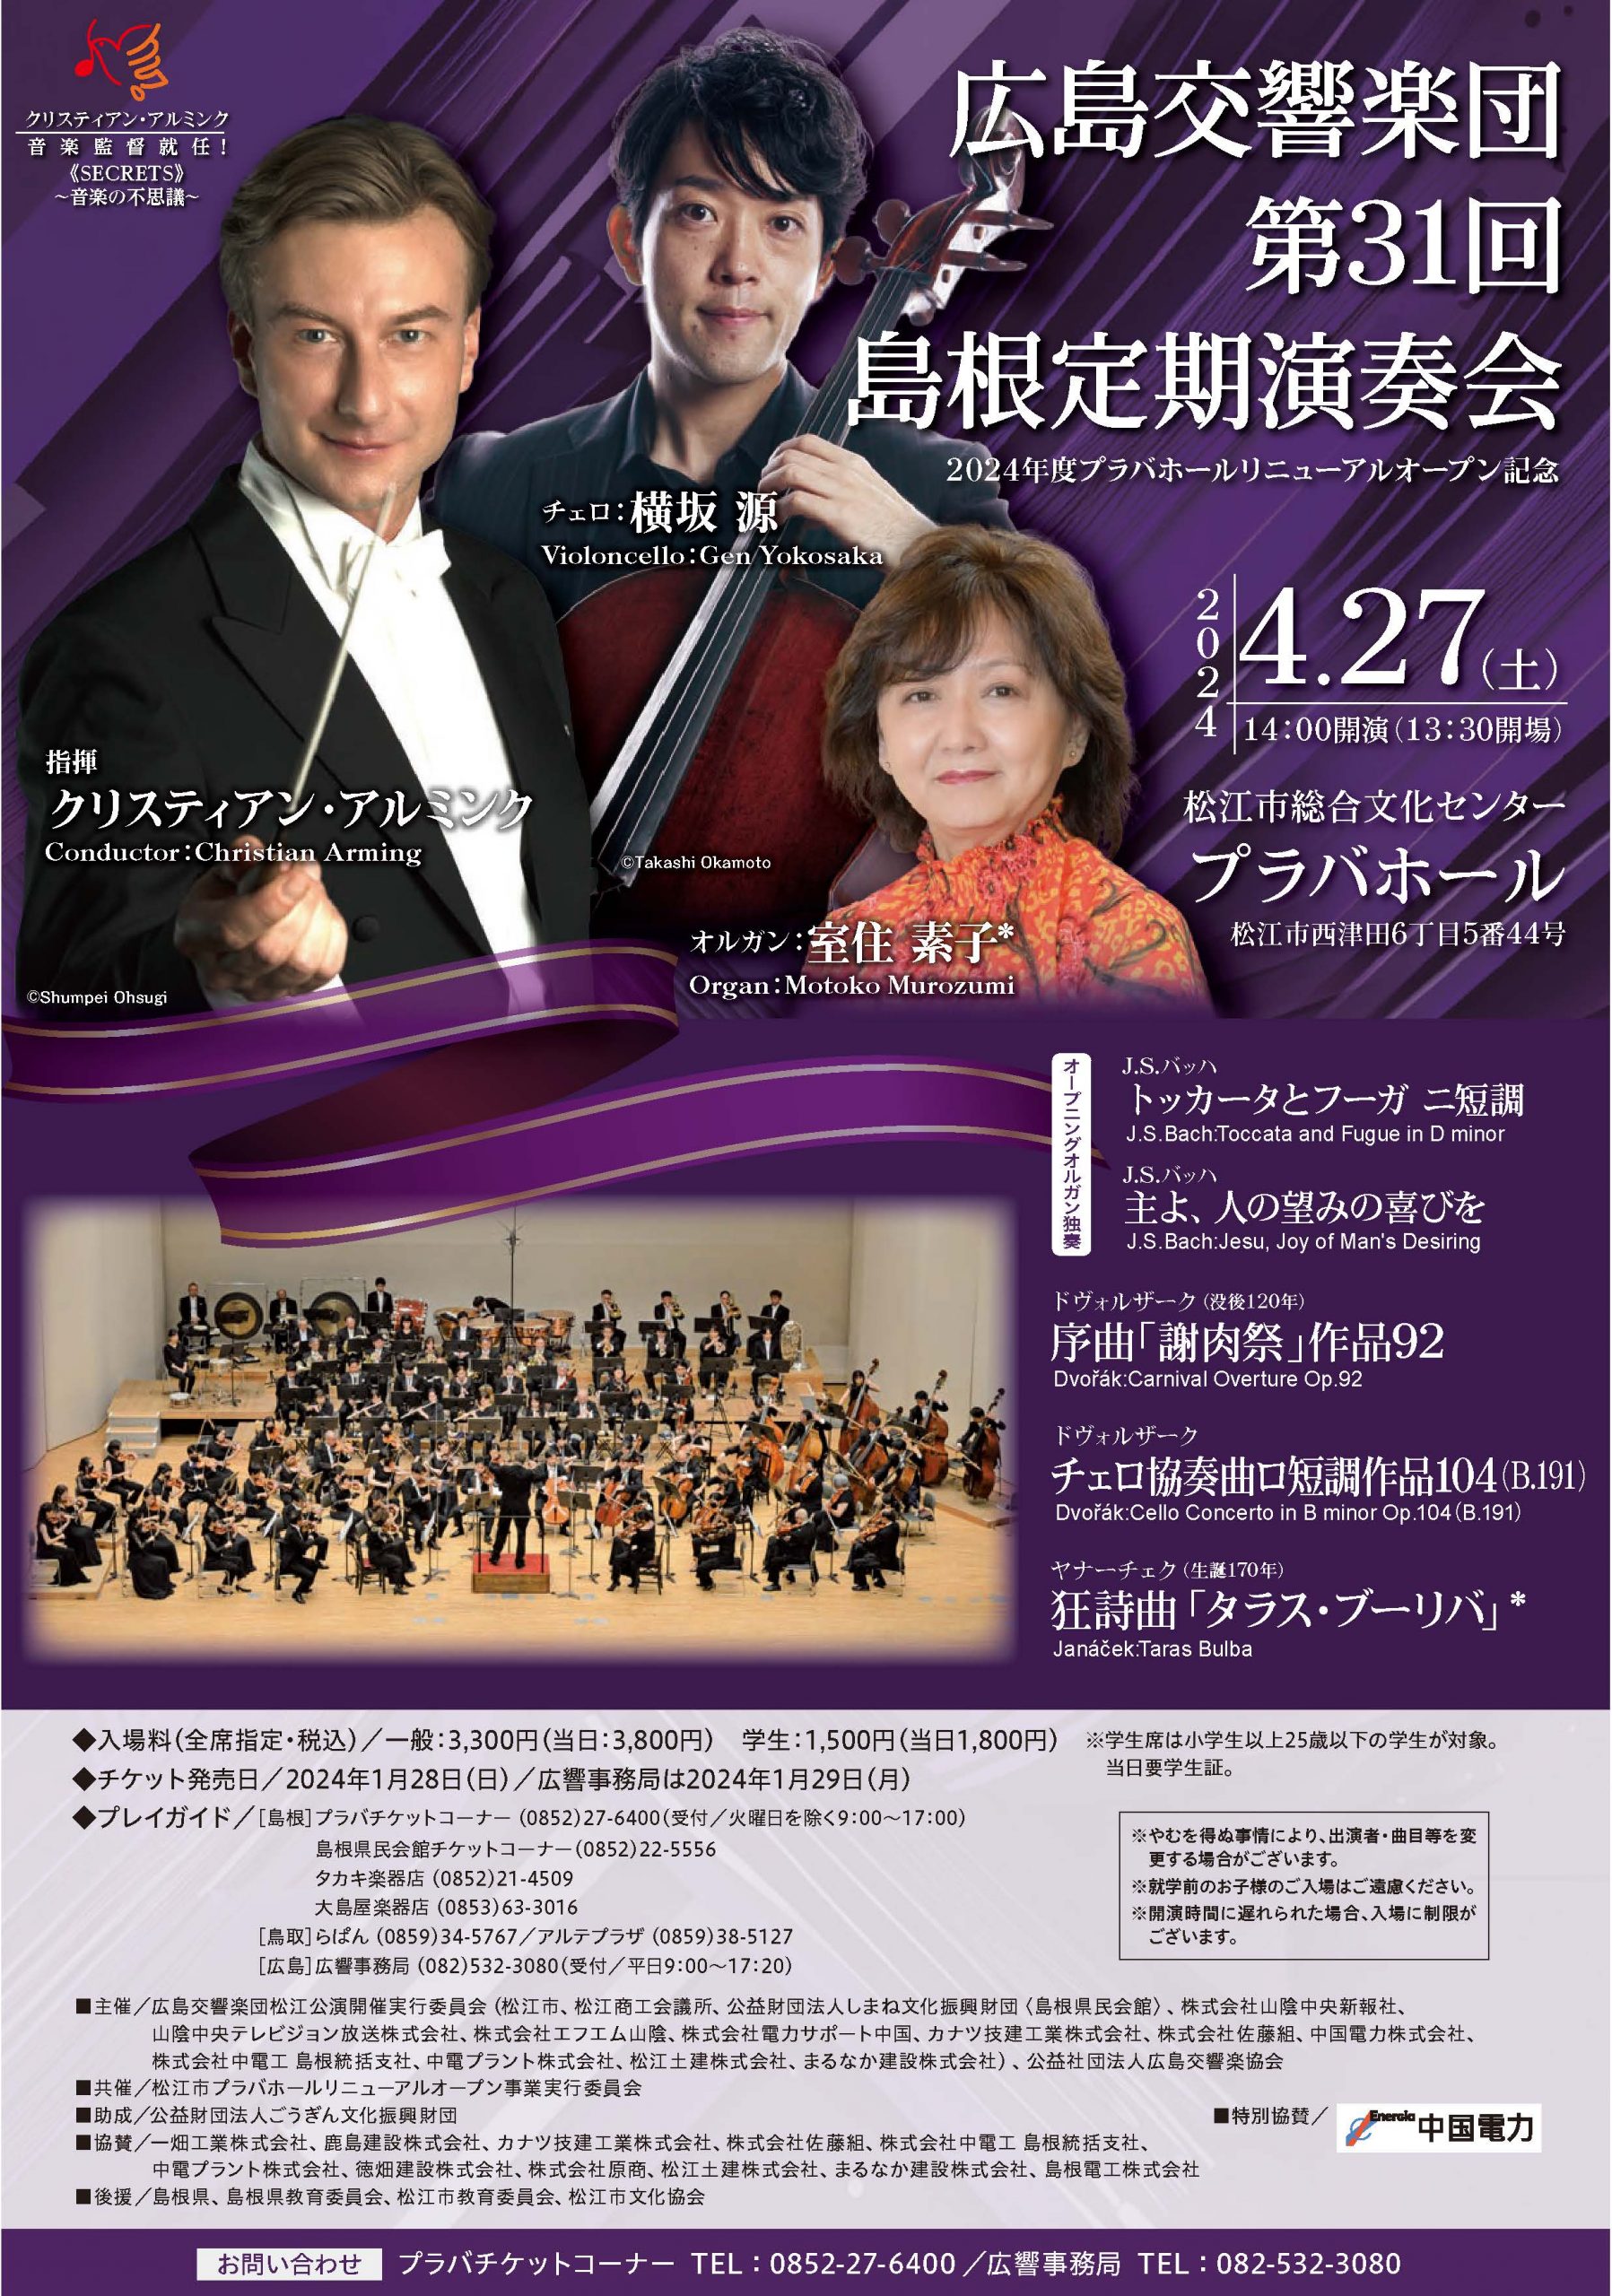 The 31st Subscription Concert in SHIMANE